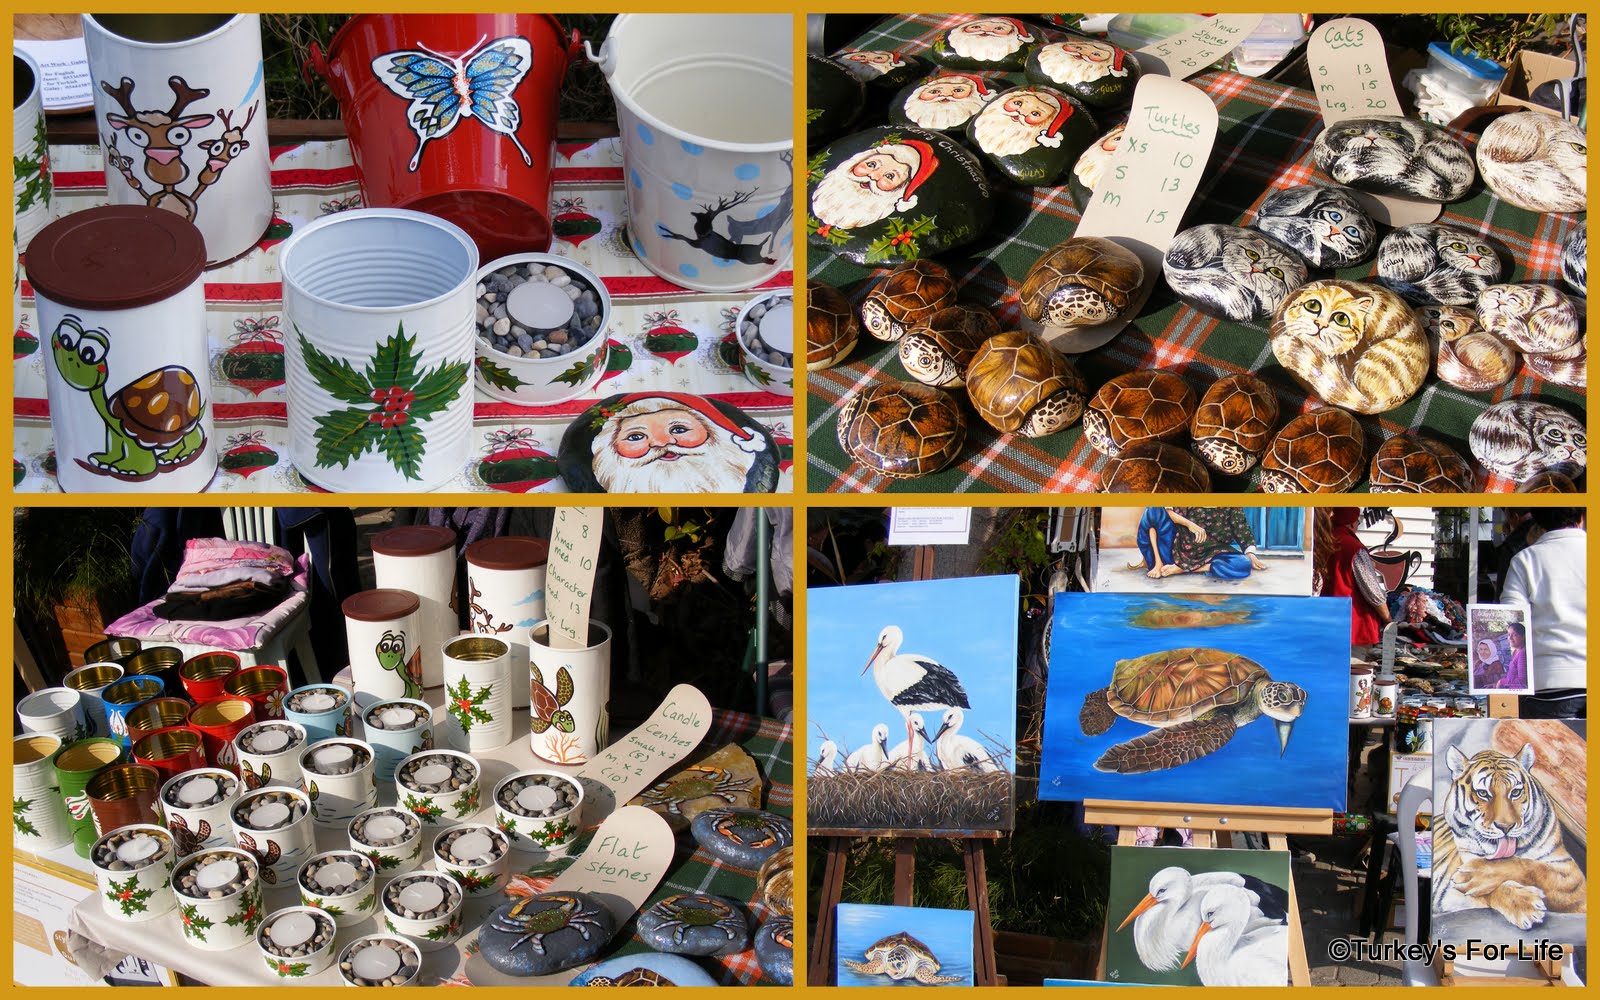 If you couldn't be at the fayre today, we hope you enjoy these photo ...